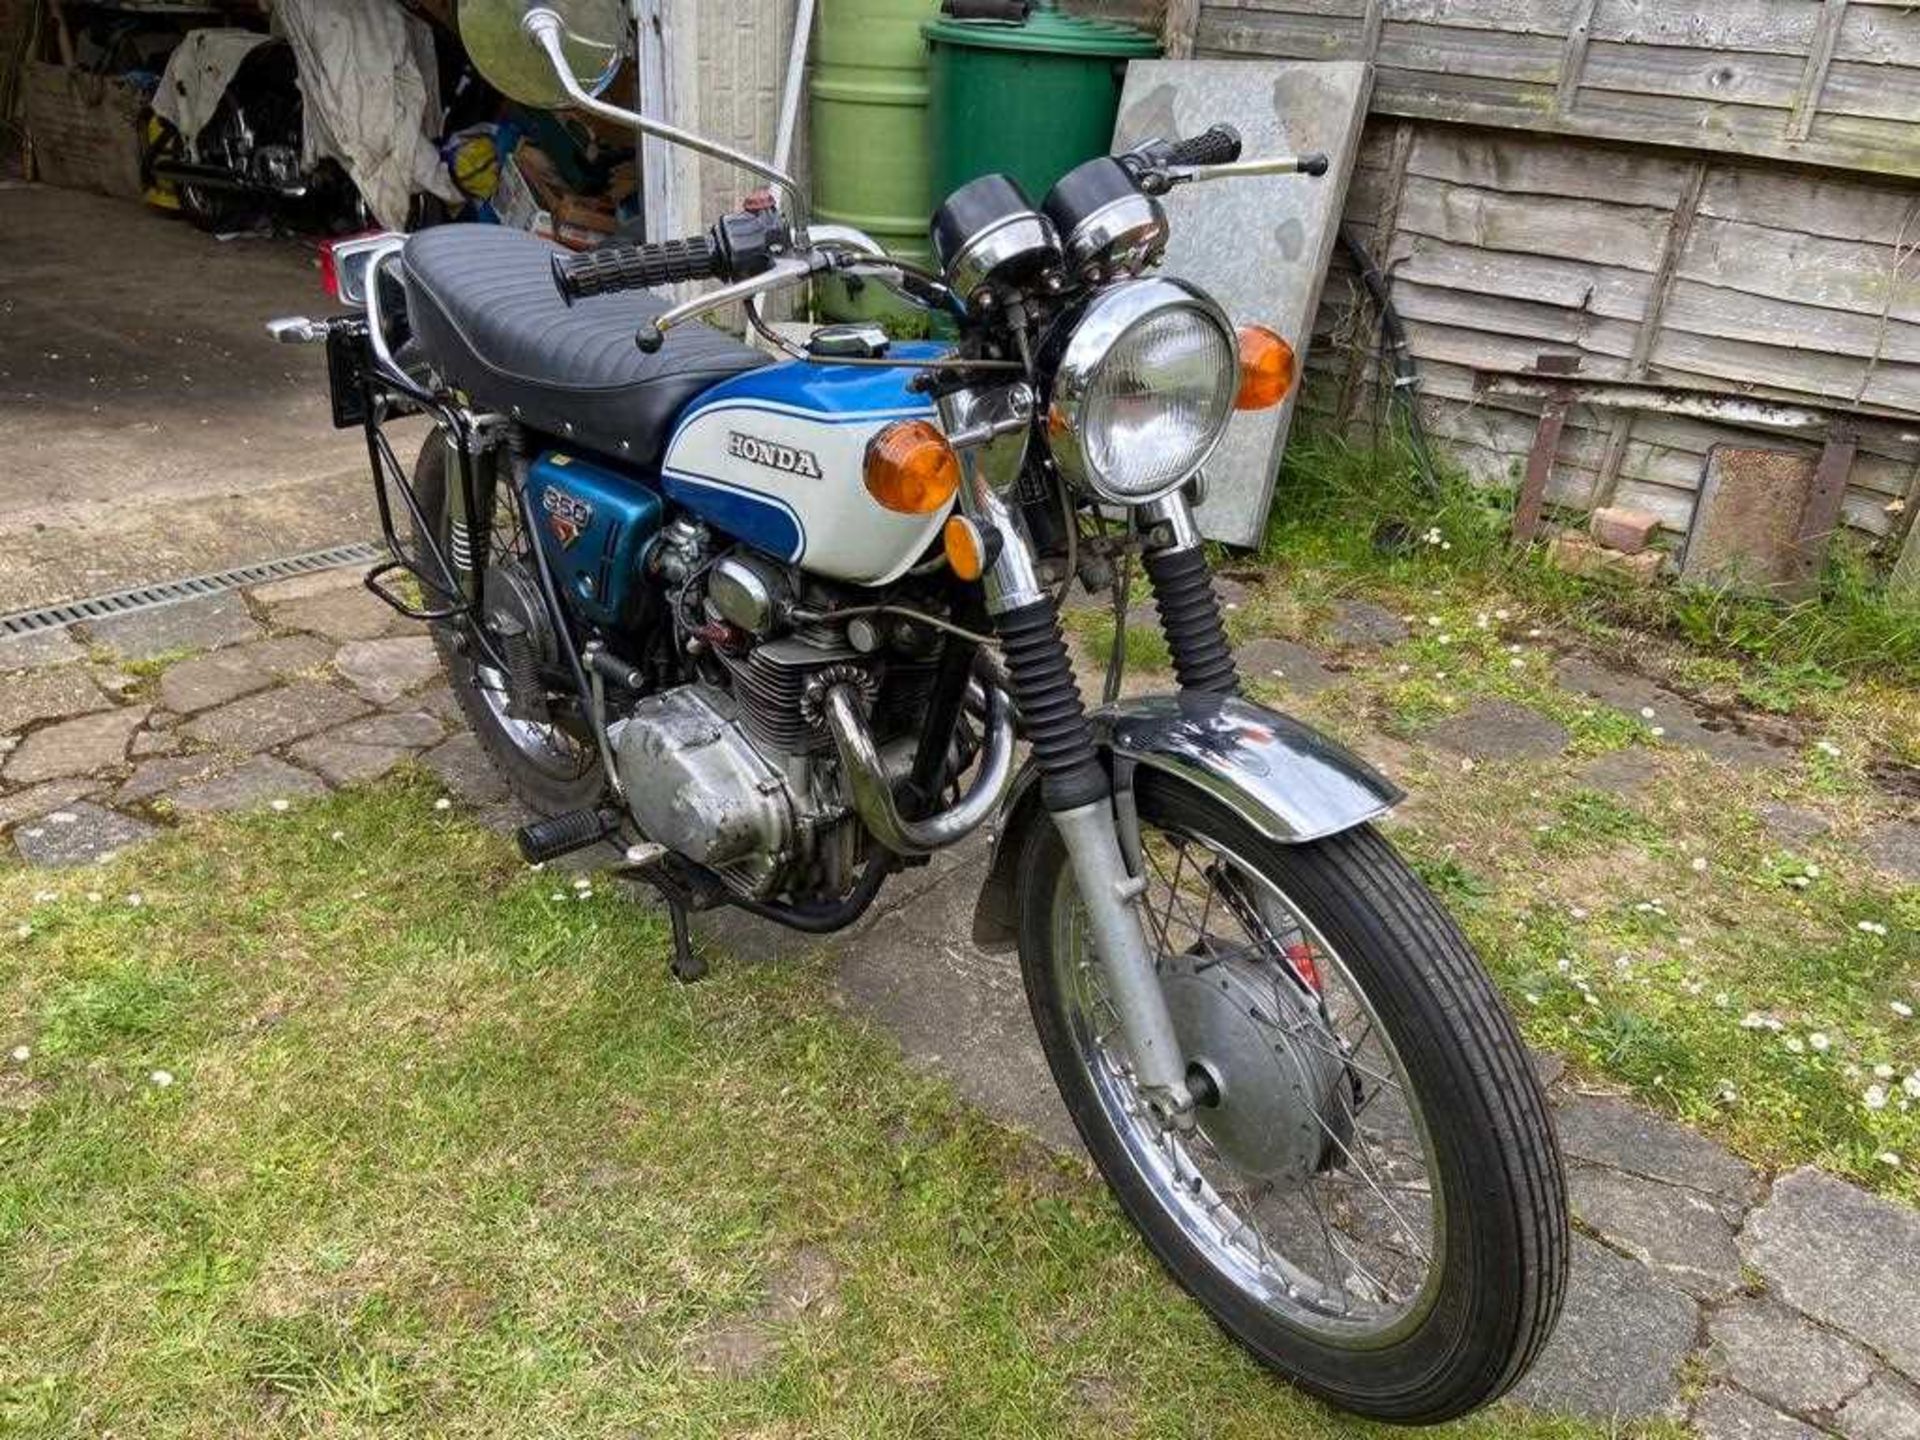 A 1973 Honda 350cc CL Sports motorcycle, registration EVN 693 Chassis No. CL350-5027453 Engine No.